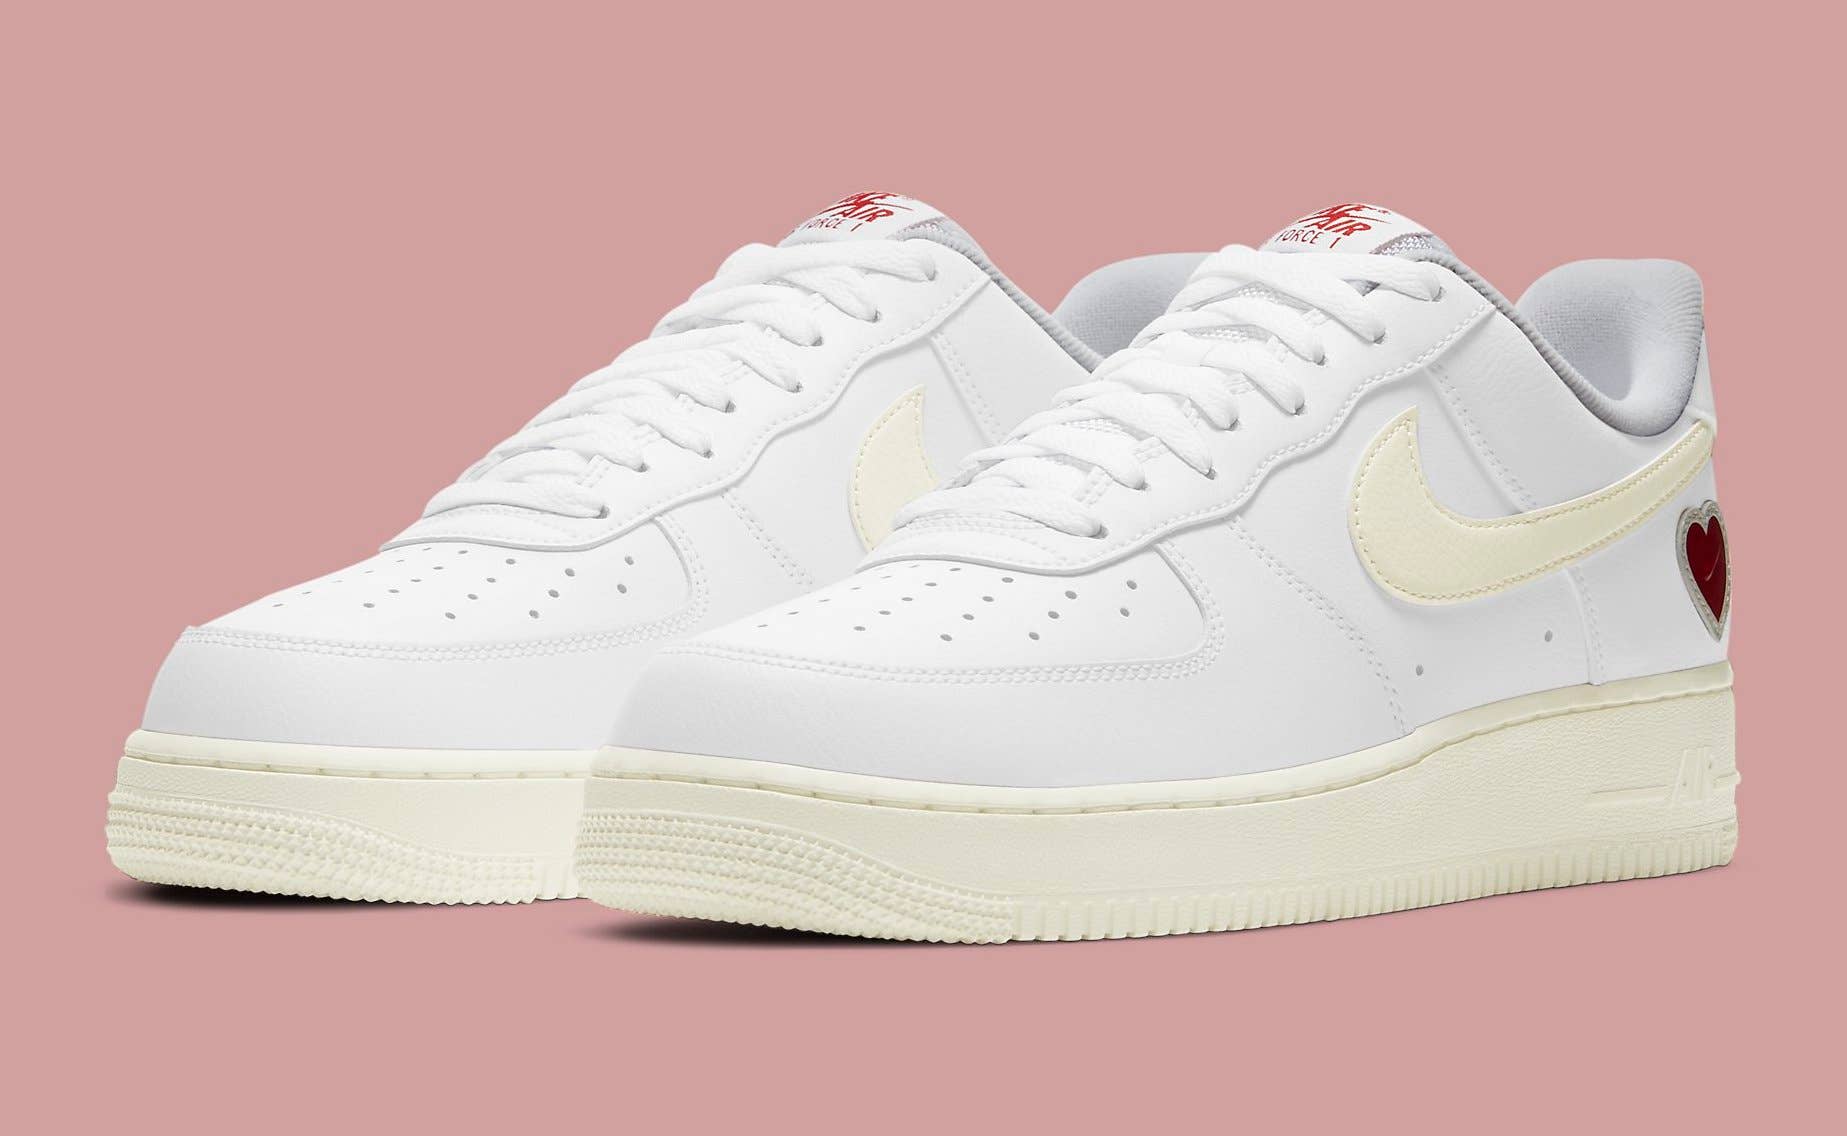 Nike Air Force 1 Low Valentine's Day 2021 Release Date DD7117 100 Pair